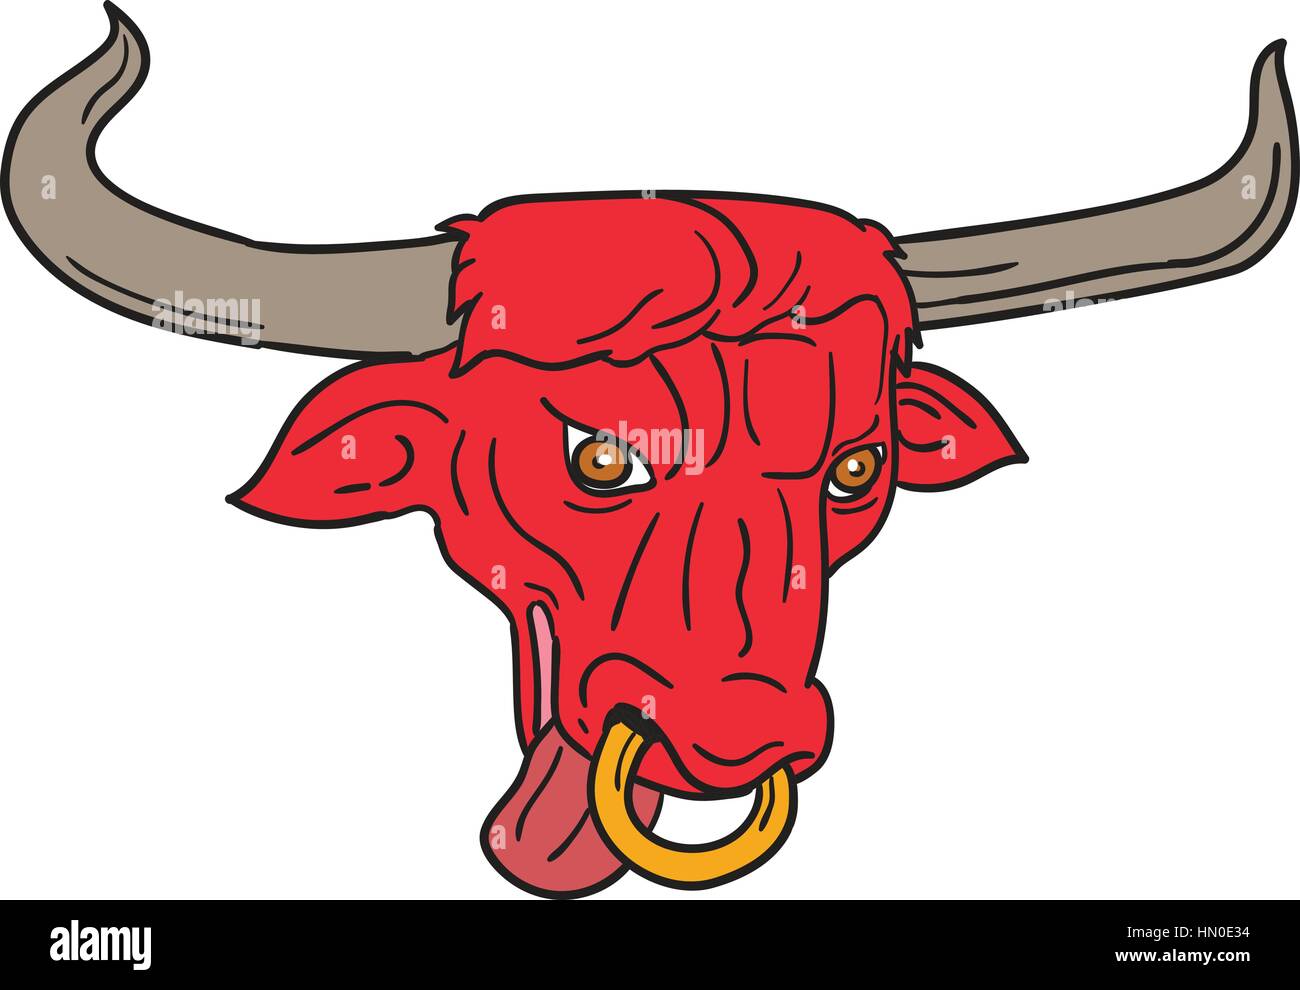 Drawing Sketch Style Illustration Of A Texas Longhorn Red Bull Head Tongue Out Set On Isolated White Background Stock Vector Image Art Alamy